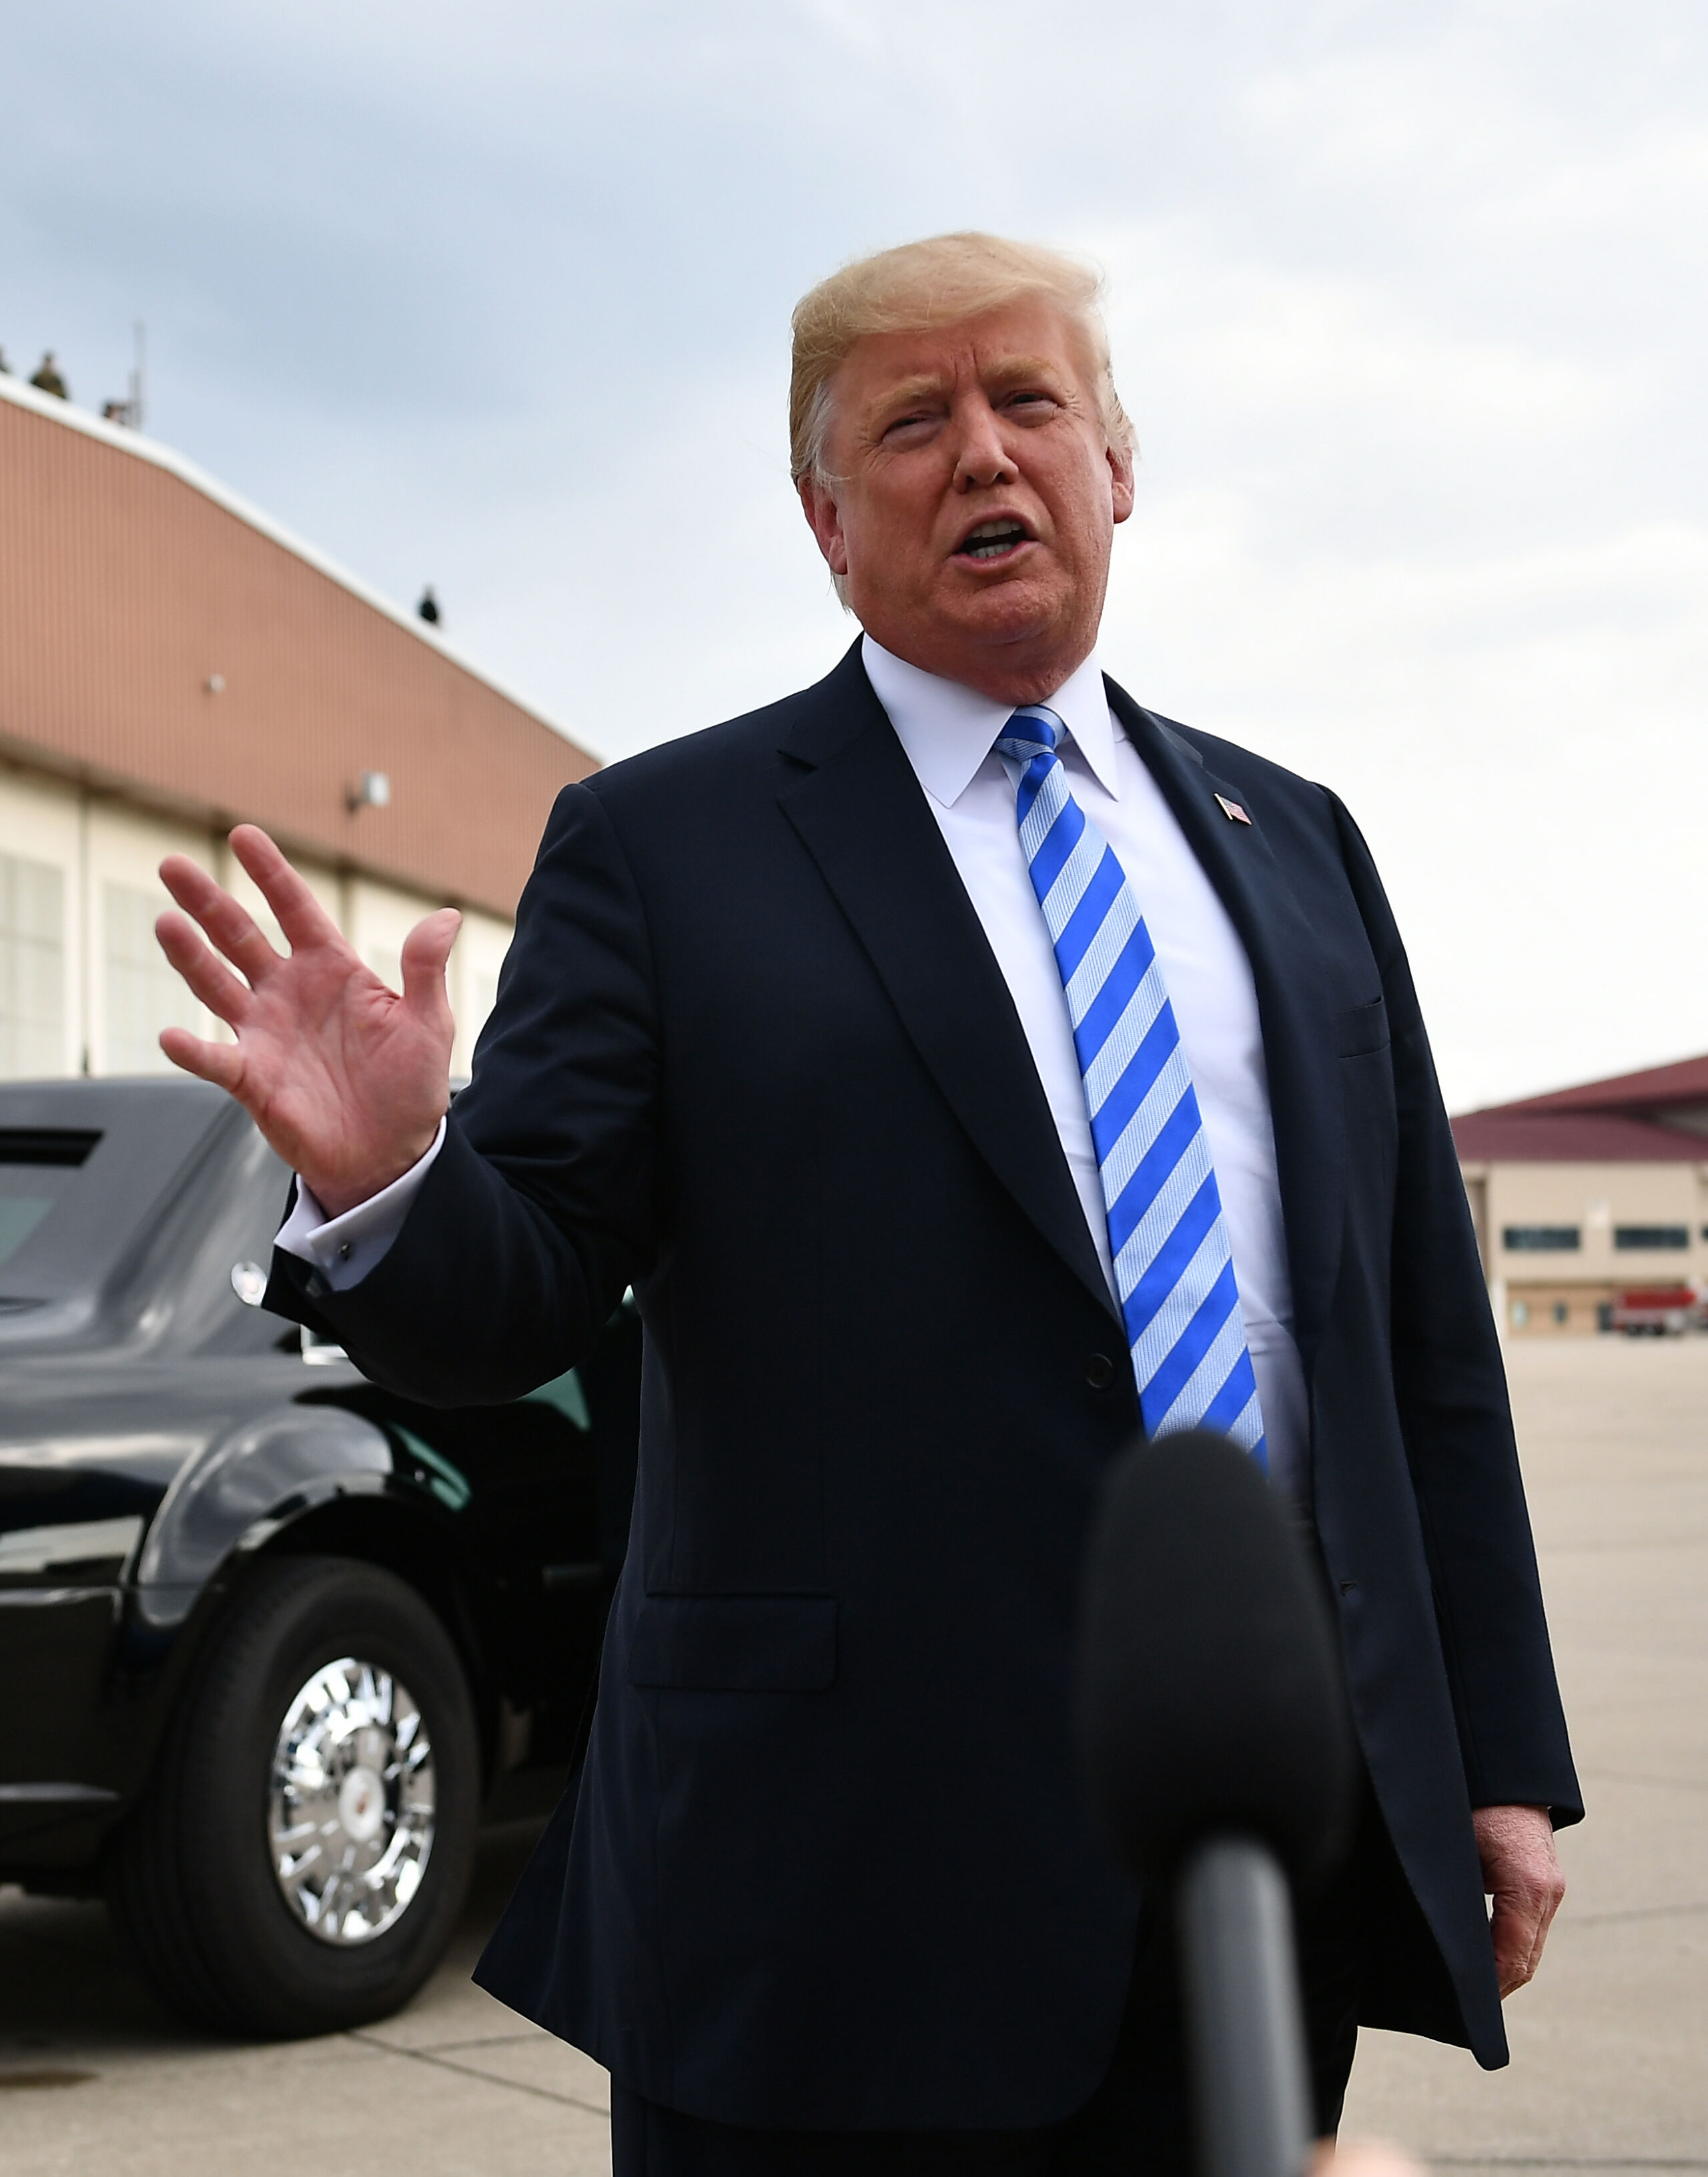 2018-08-21 23:39:08 US President Donald Trump speaks to the press upon arrival at Yeager Airport in Charleston, West Virginia on August 21, 2018.  Trump  said he was 'very sad' about Manafort conviction. Donald Trump's former campaign chief Paul Manafort was found guilty of fraud Tuesday, in the first trial resulting from the investigation into Russian meddling in the 2016 presidential election. MANDEL NGAN / AFP